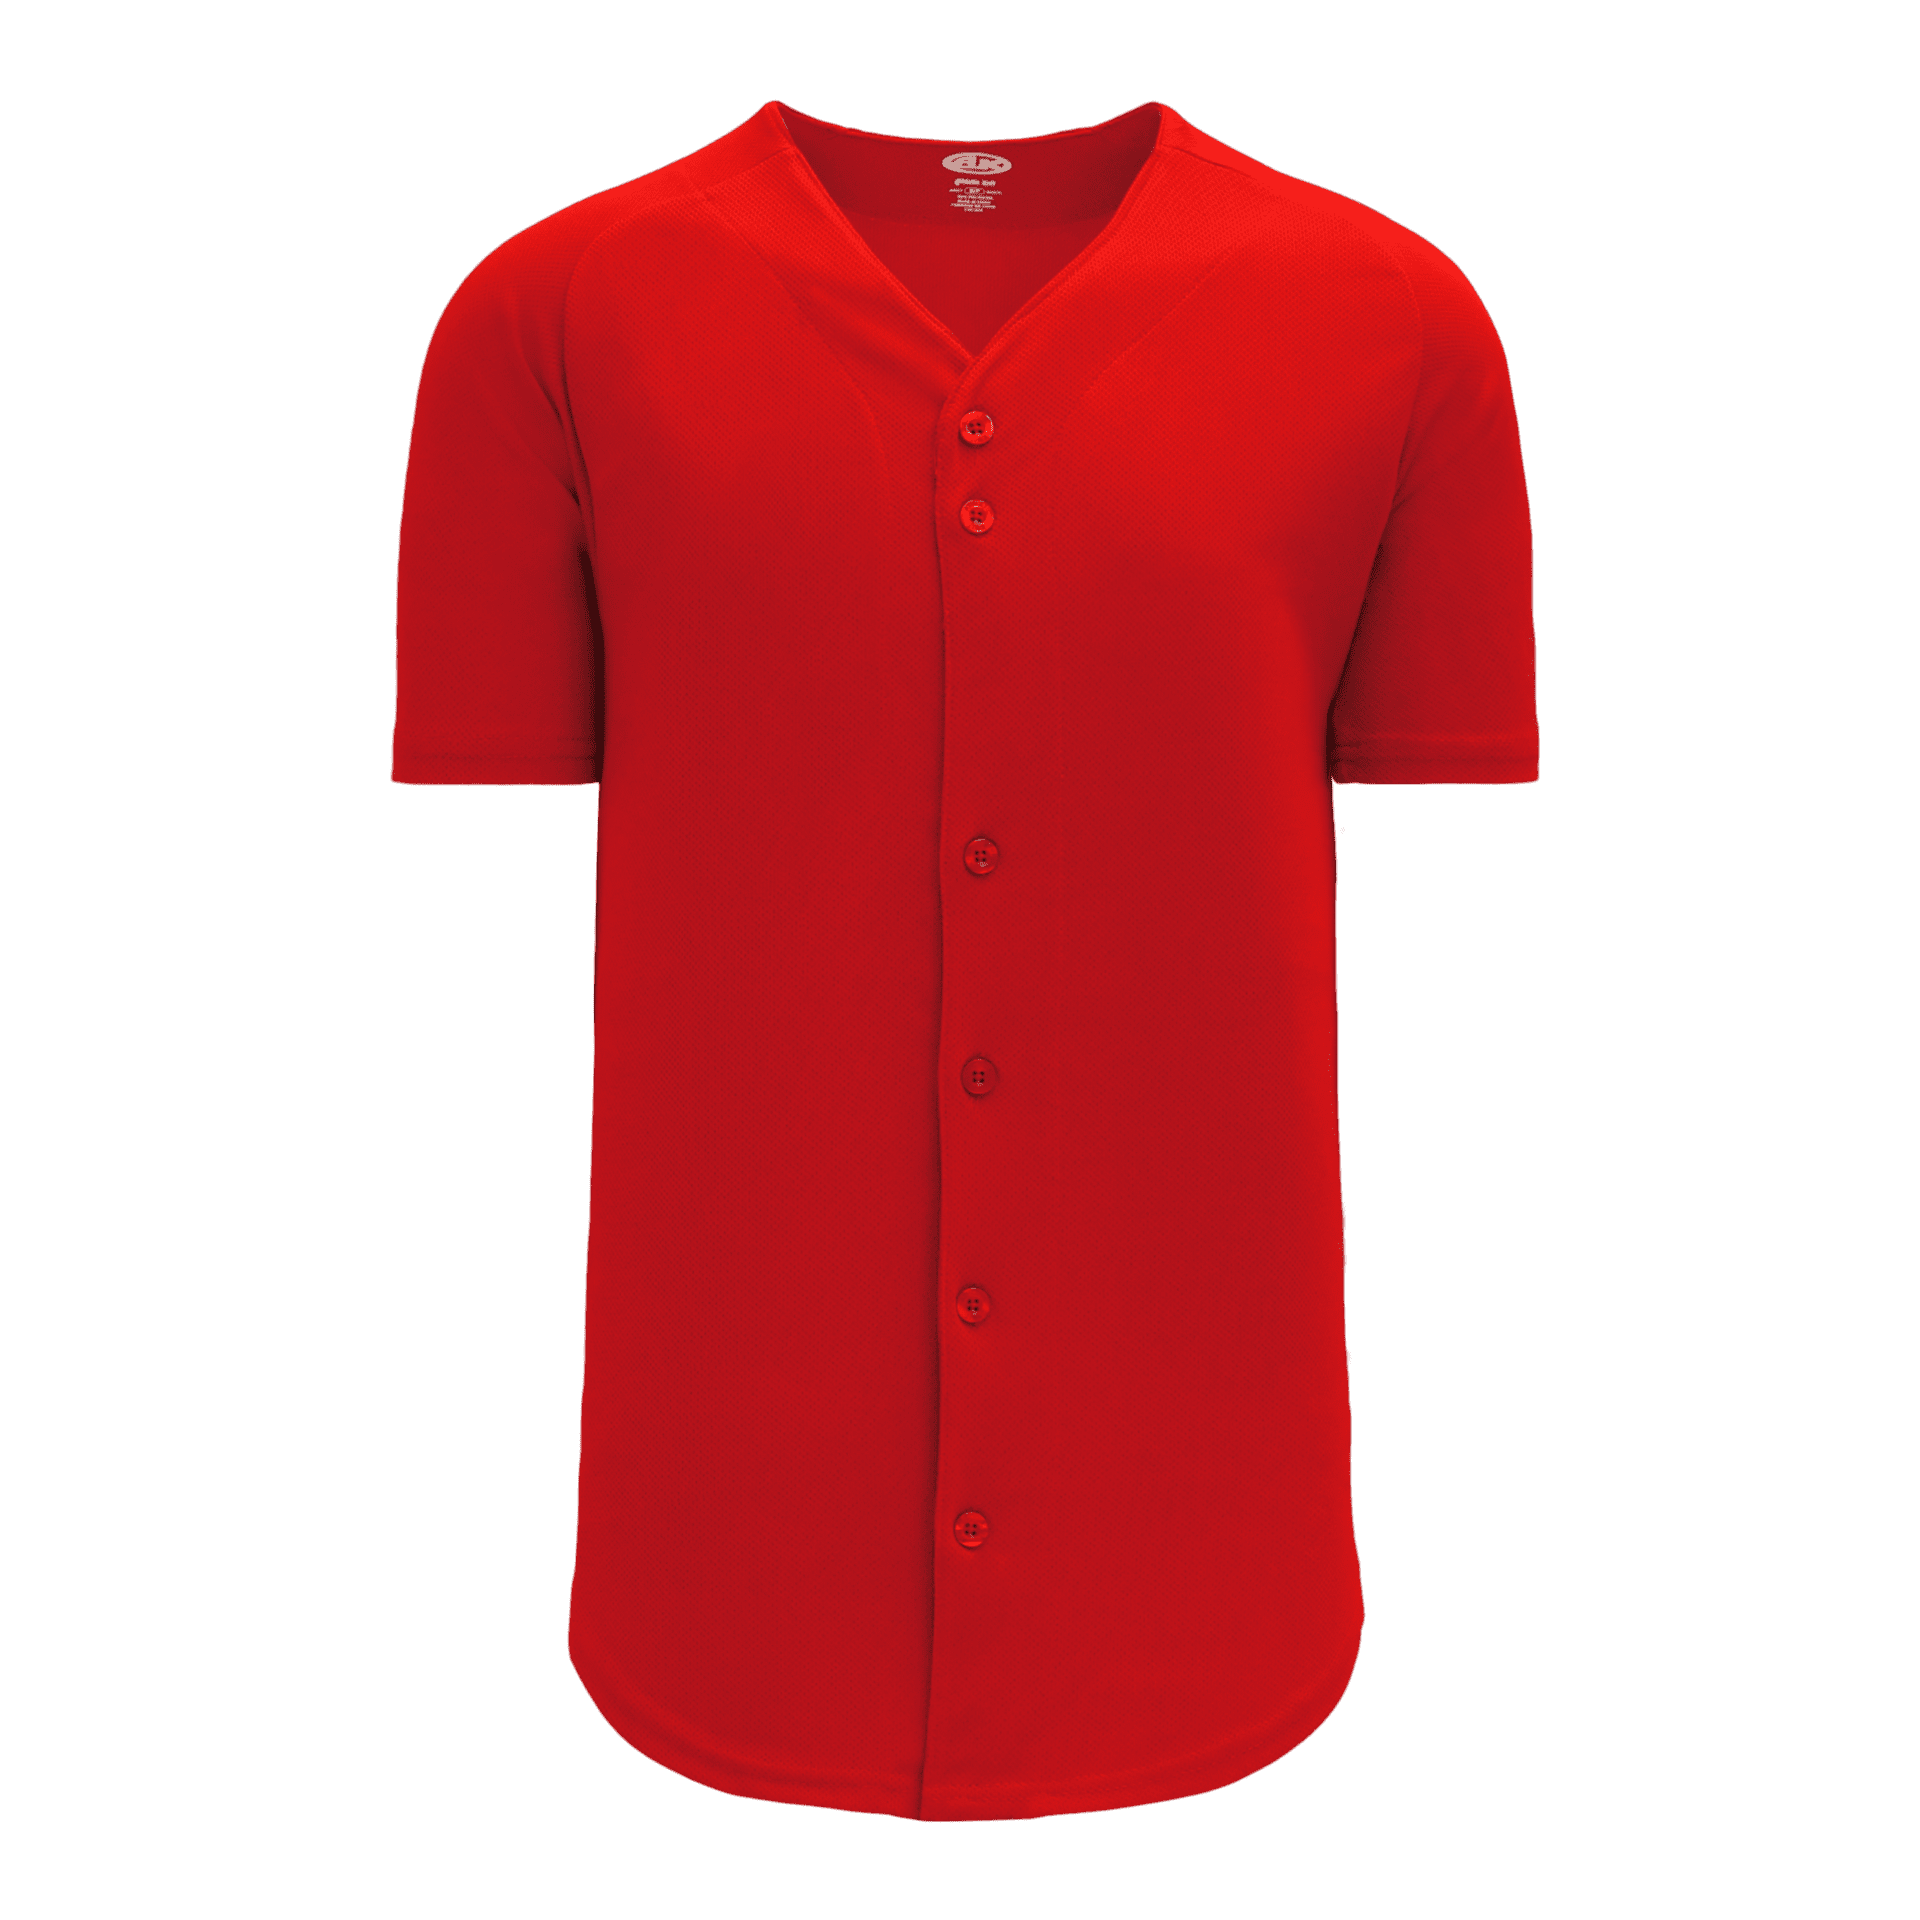 ATHLETIC KNIT FULL BUTTON BASEBALL JERSEY #BA5200 Red